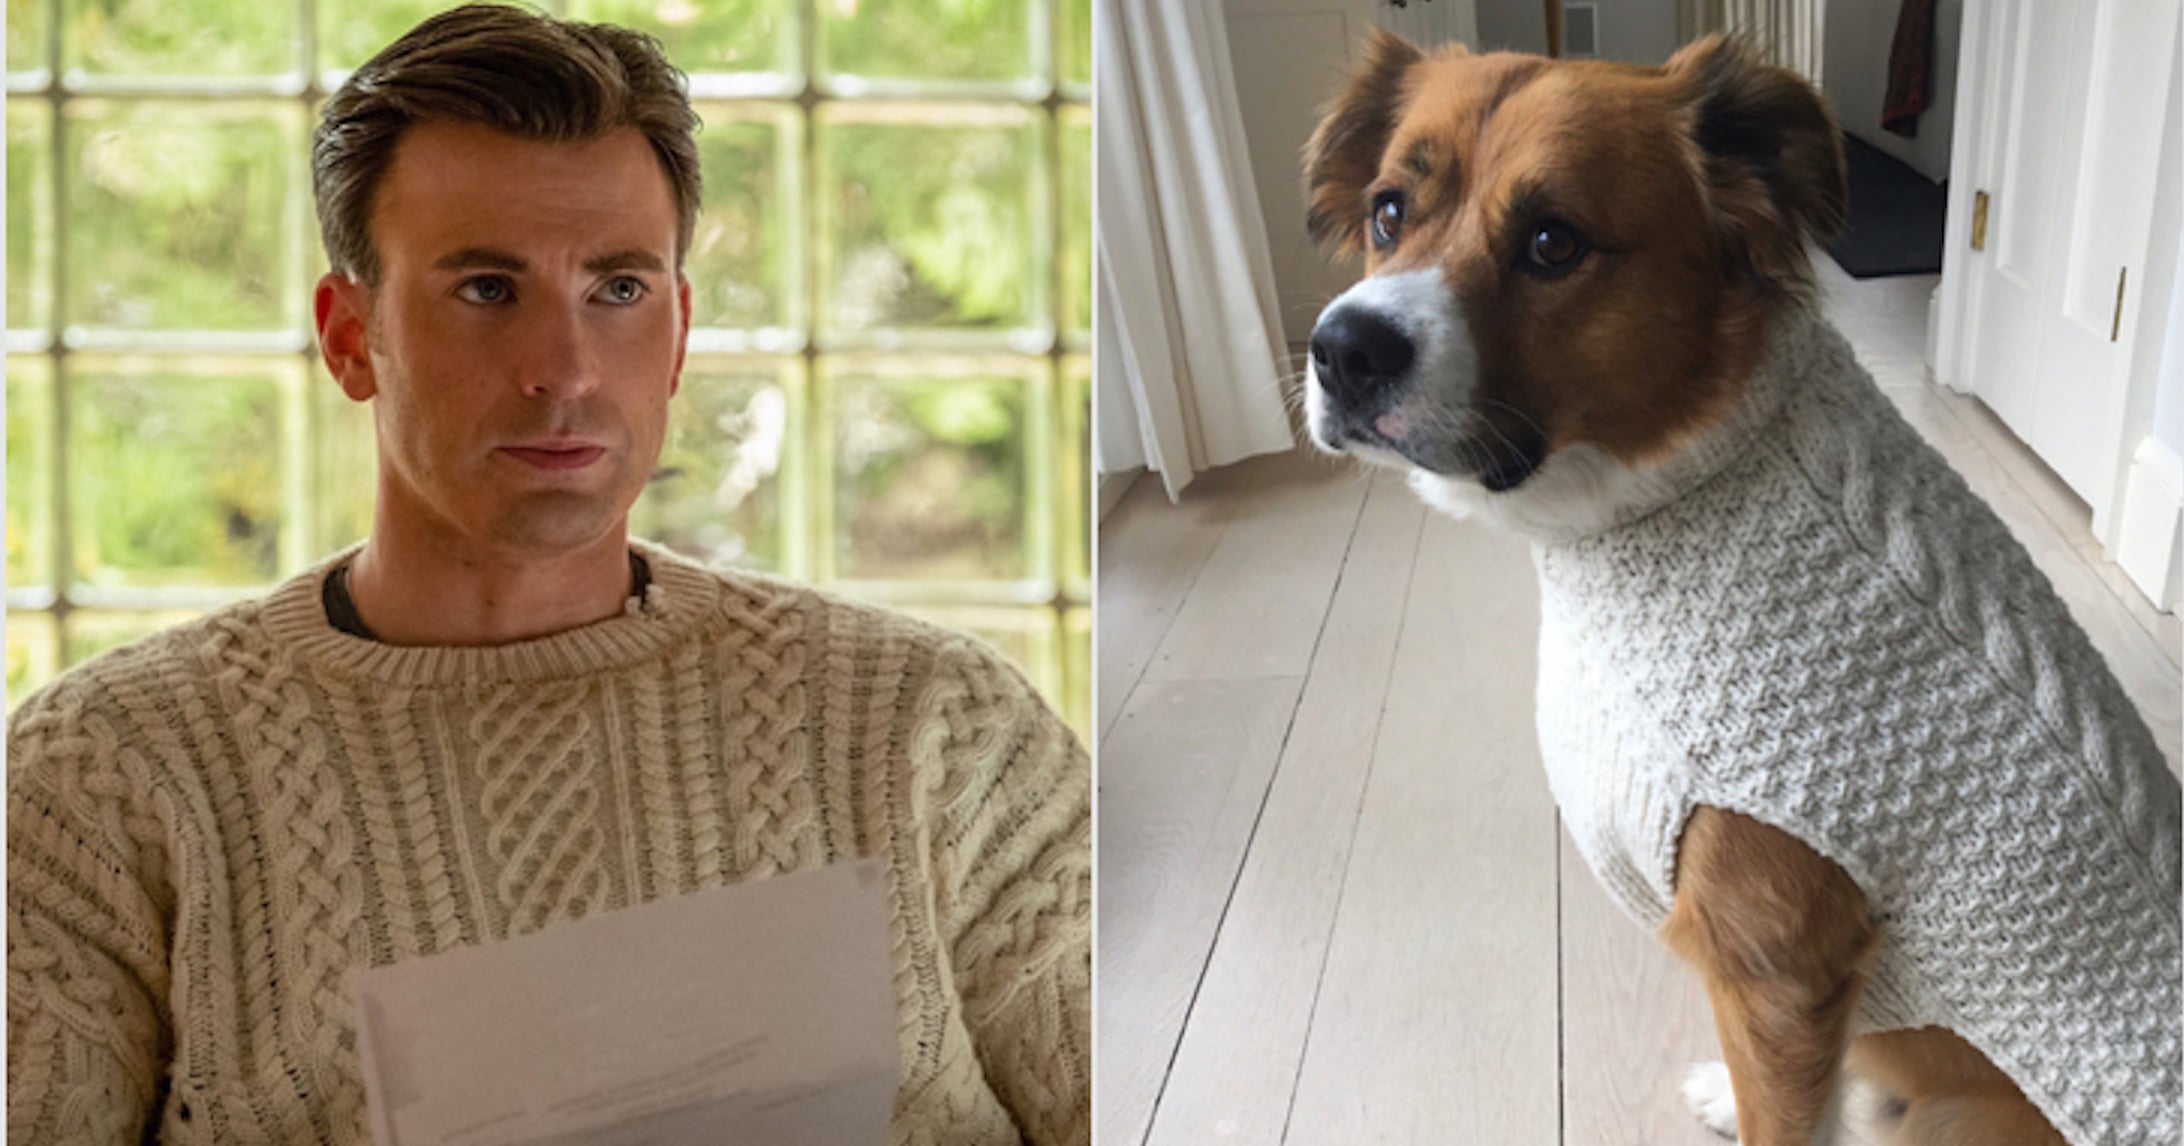 Chris Evans' dog looks amazing in his own matching 'Knives Out' sweater